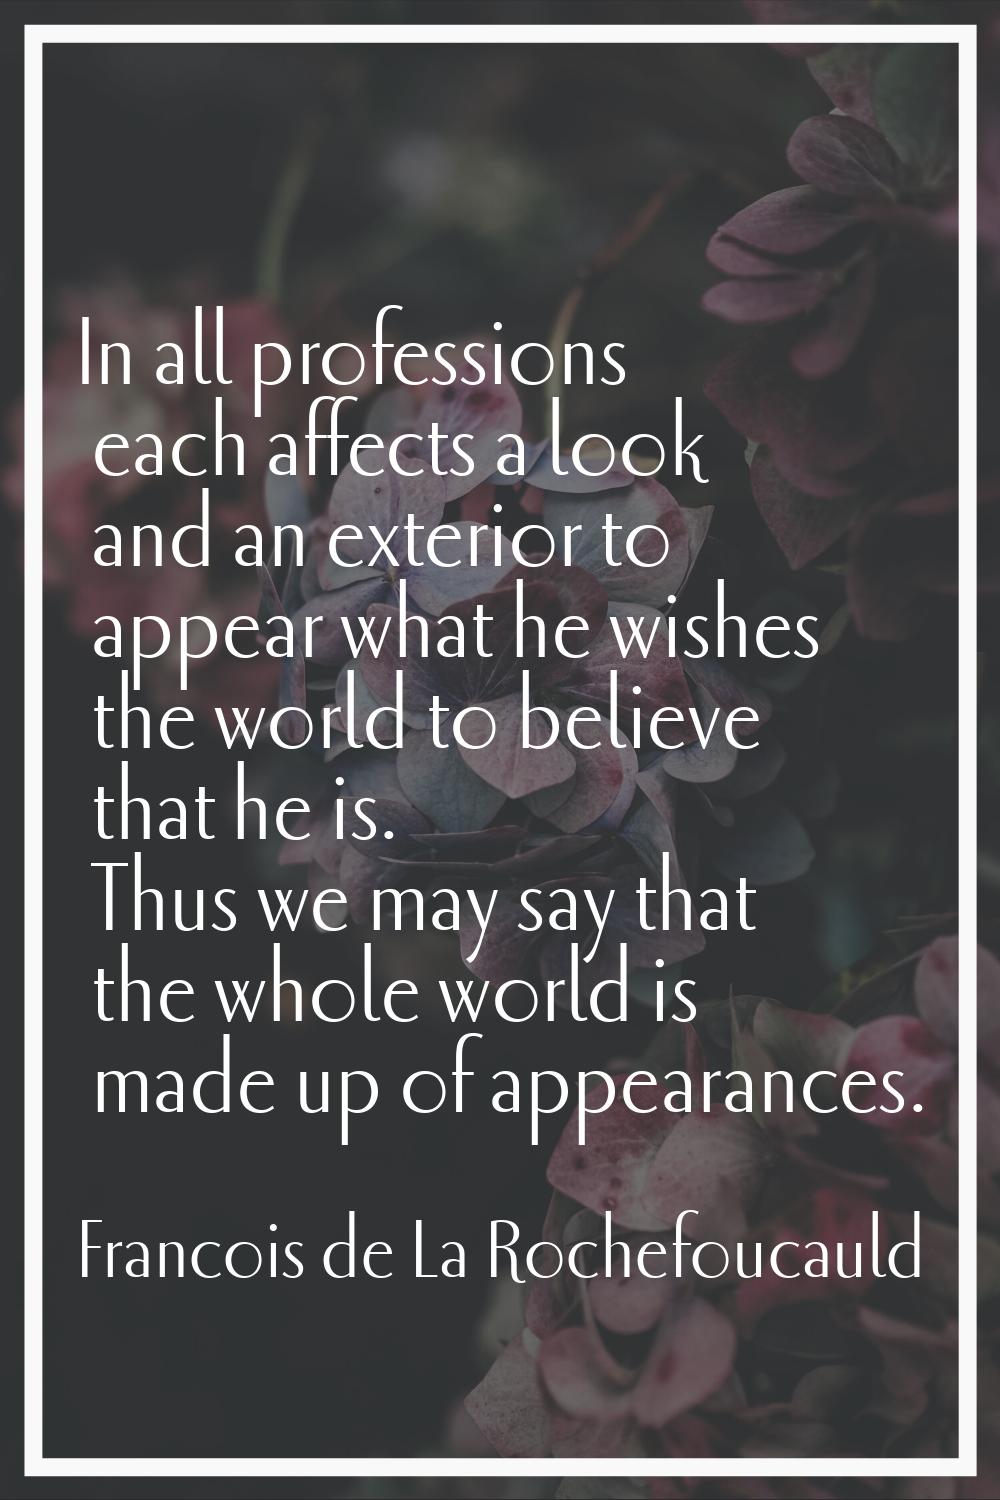 In all professions each affects a look and an exterior to appear what he wishes the world to believ